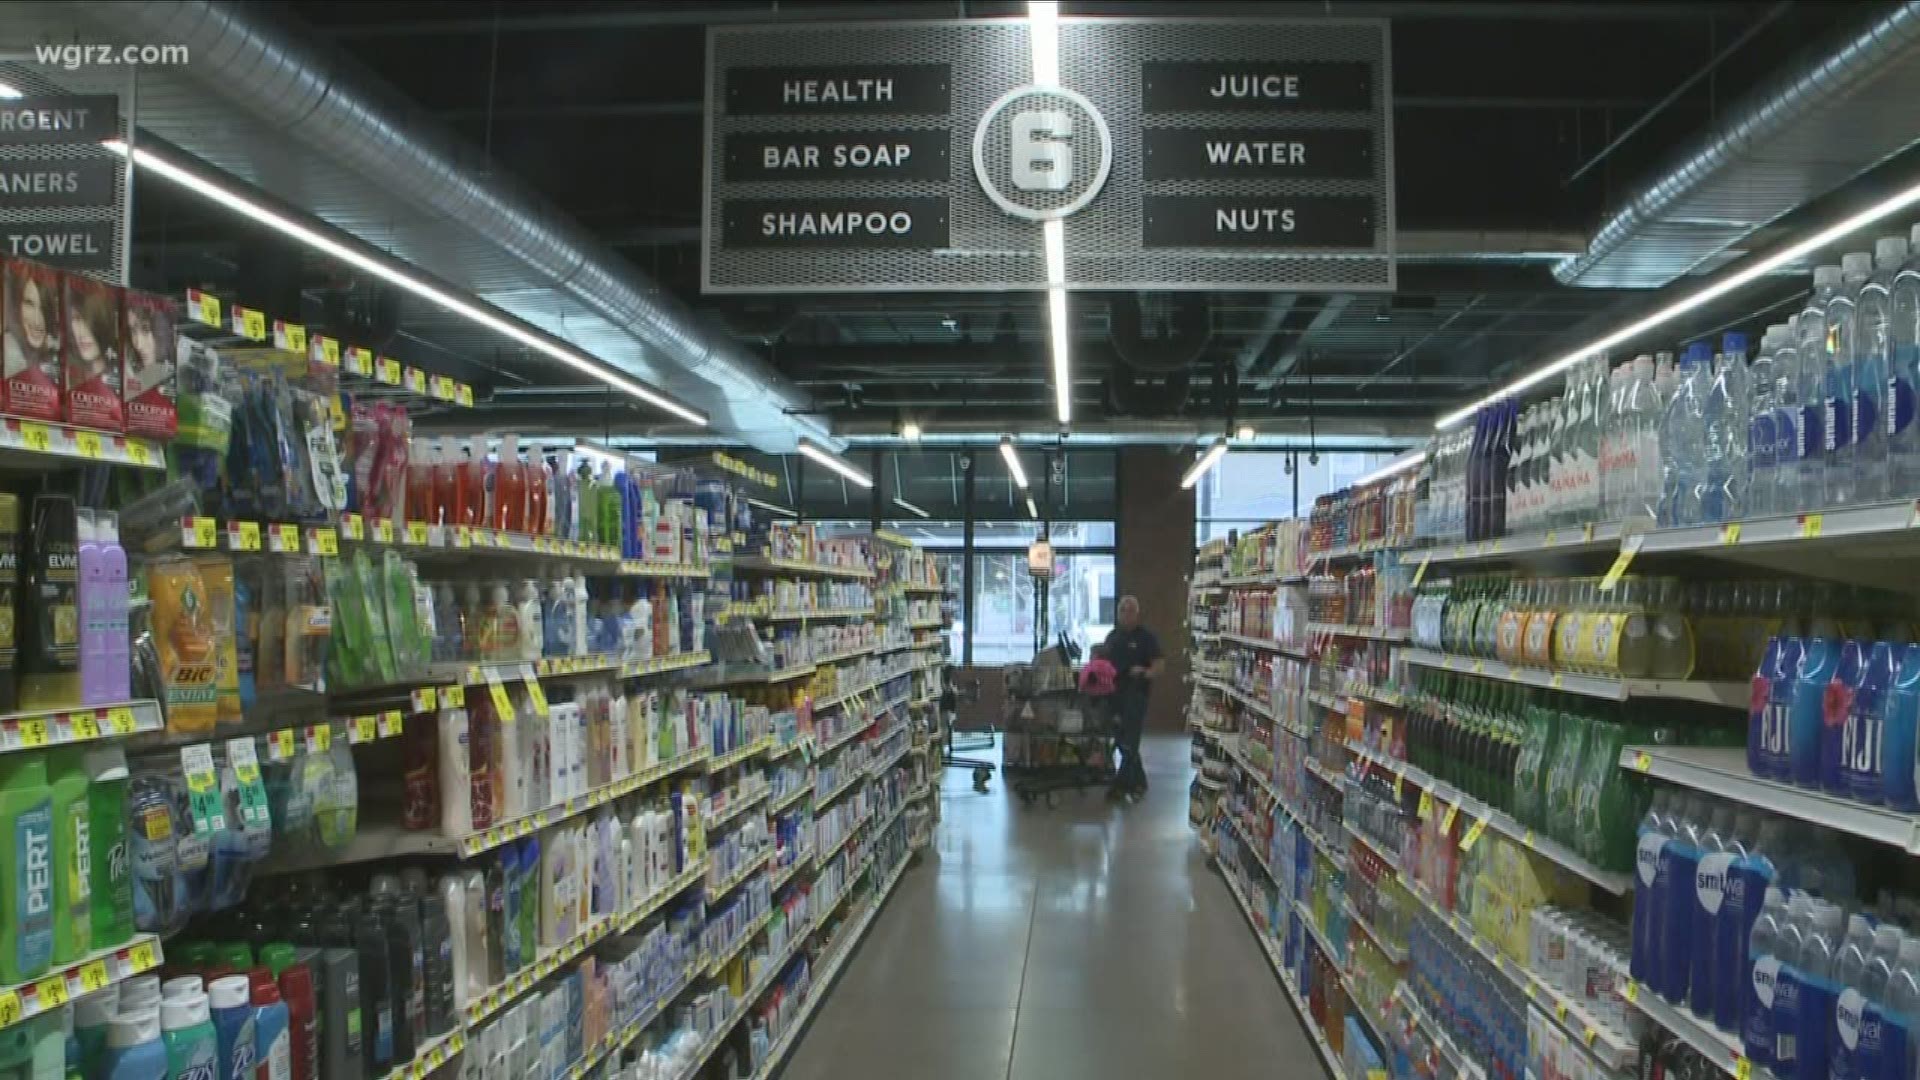 grocery store chains have a wide variety of products, but keep very little in their inventory.